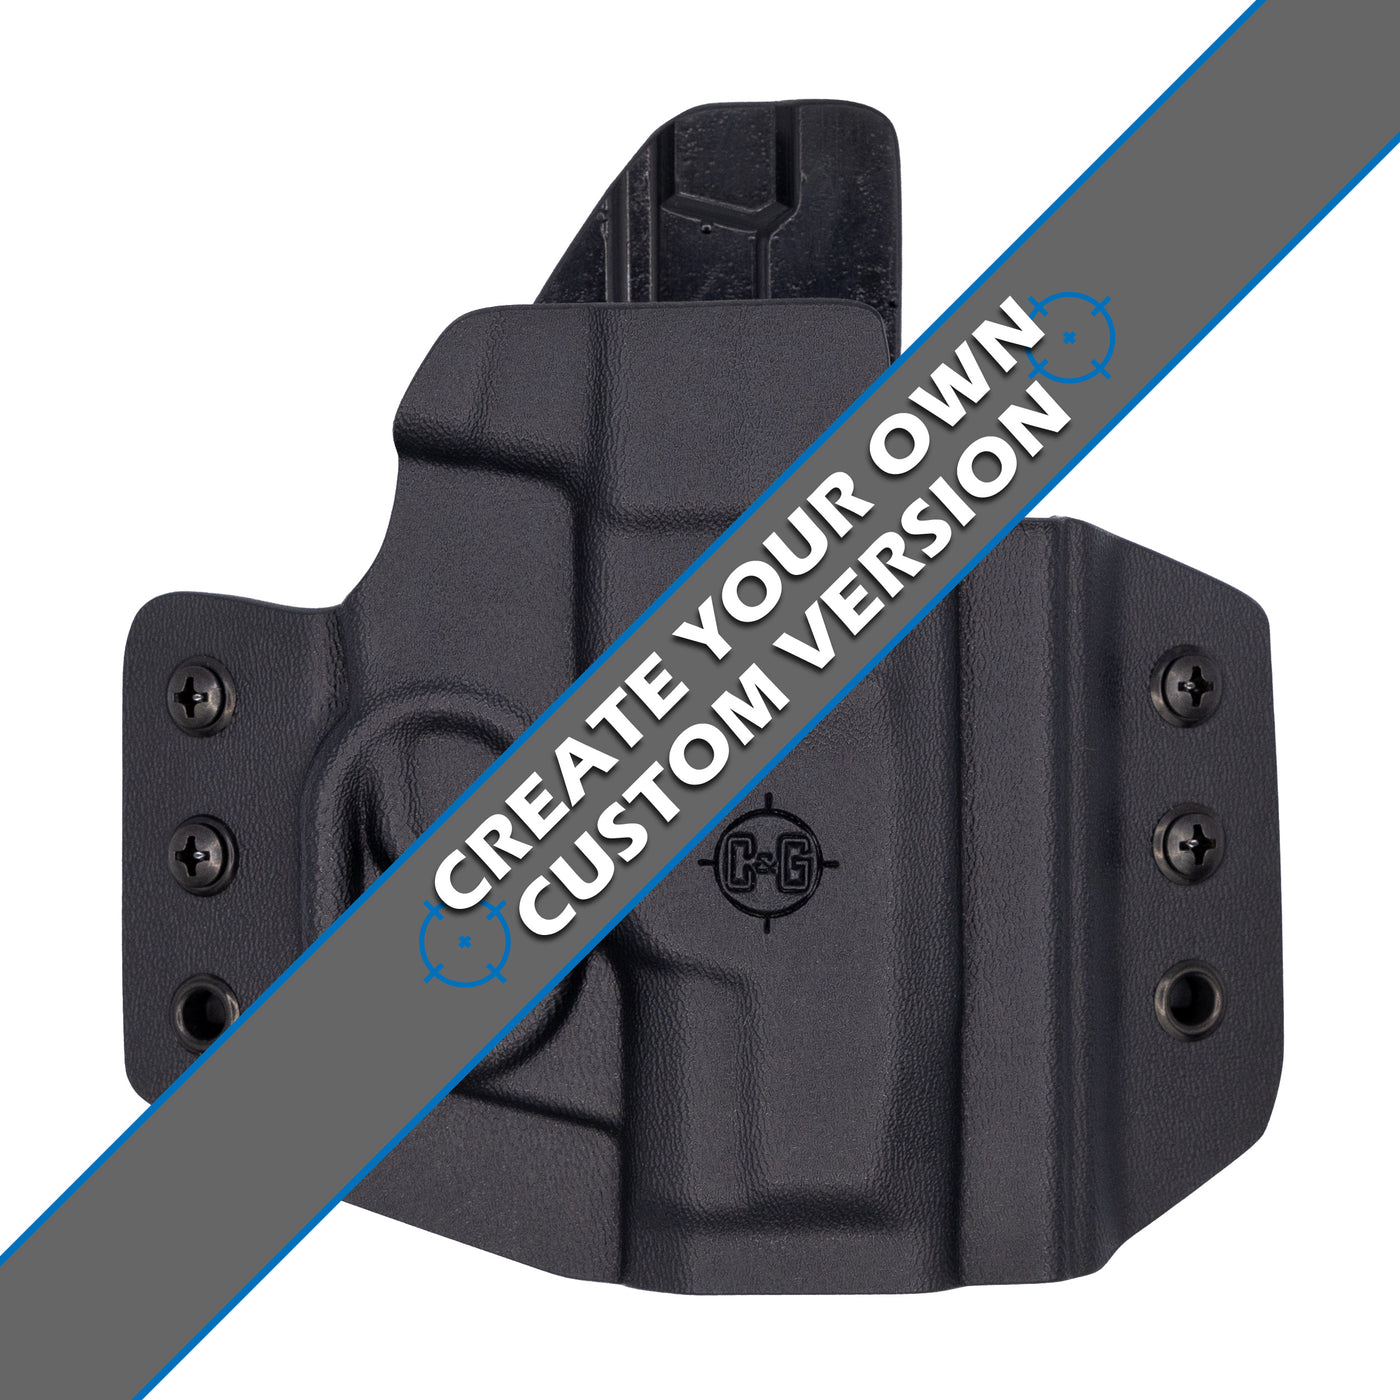 Custom C&G OWB Holster for a Ruger MAX9